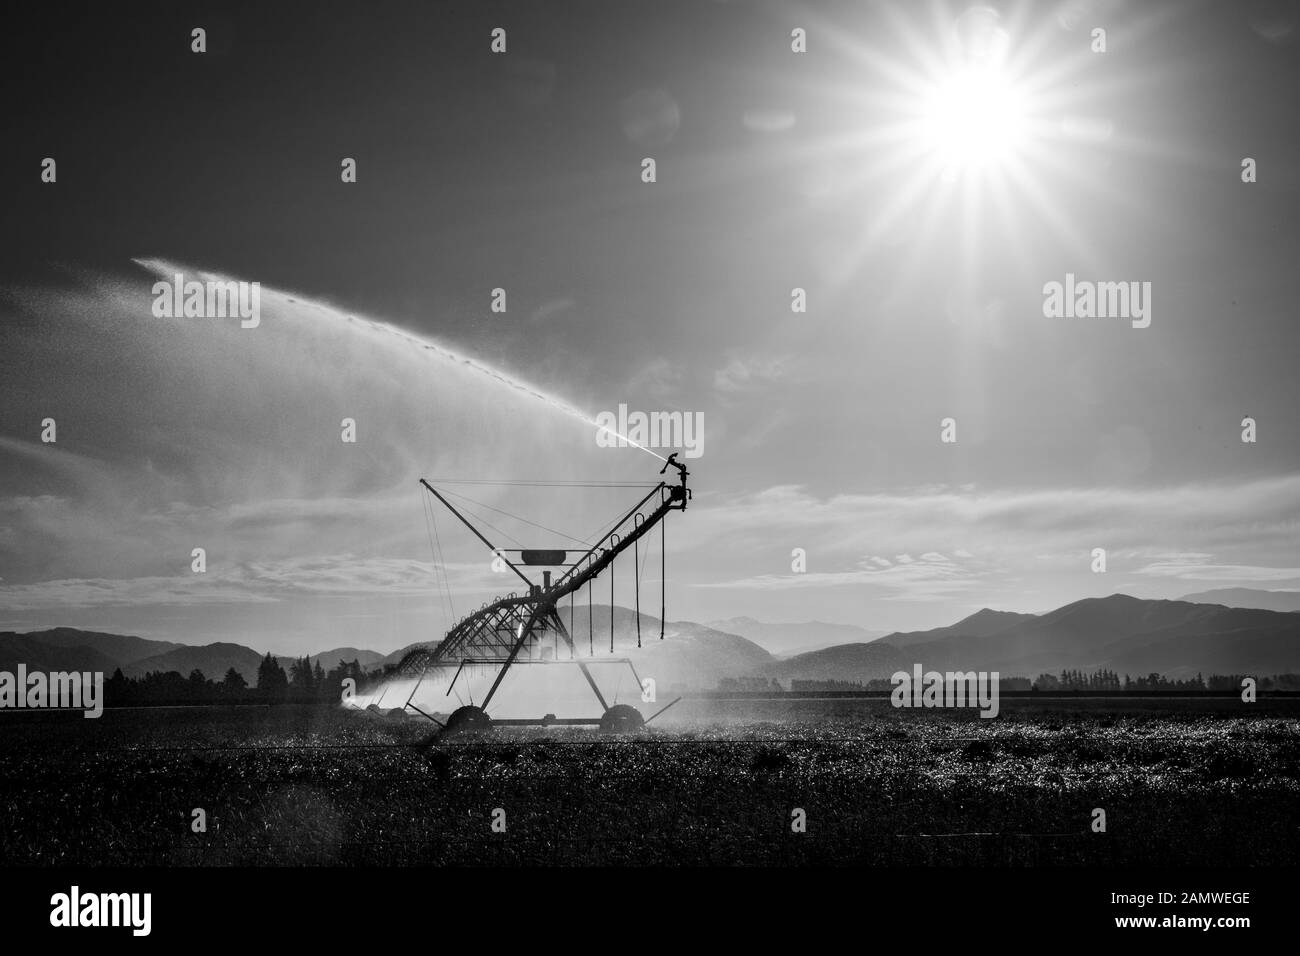 An irrigator sprays water high into the air over farm crops in the late afternoon sun Stock Photo